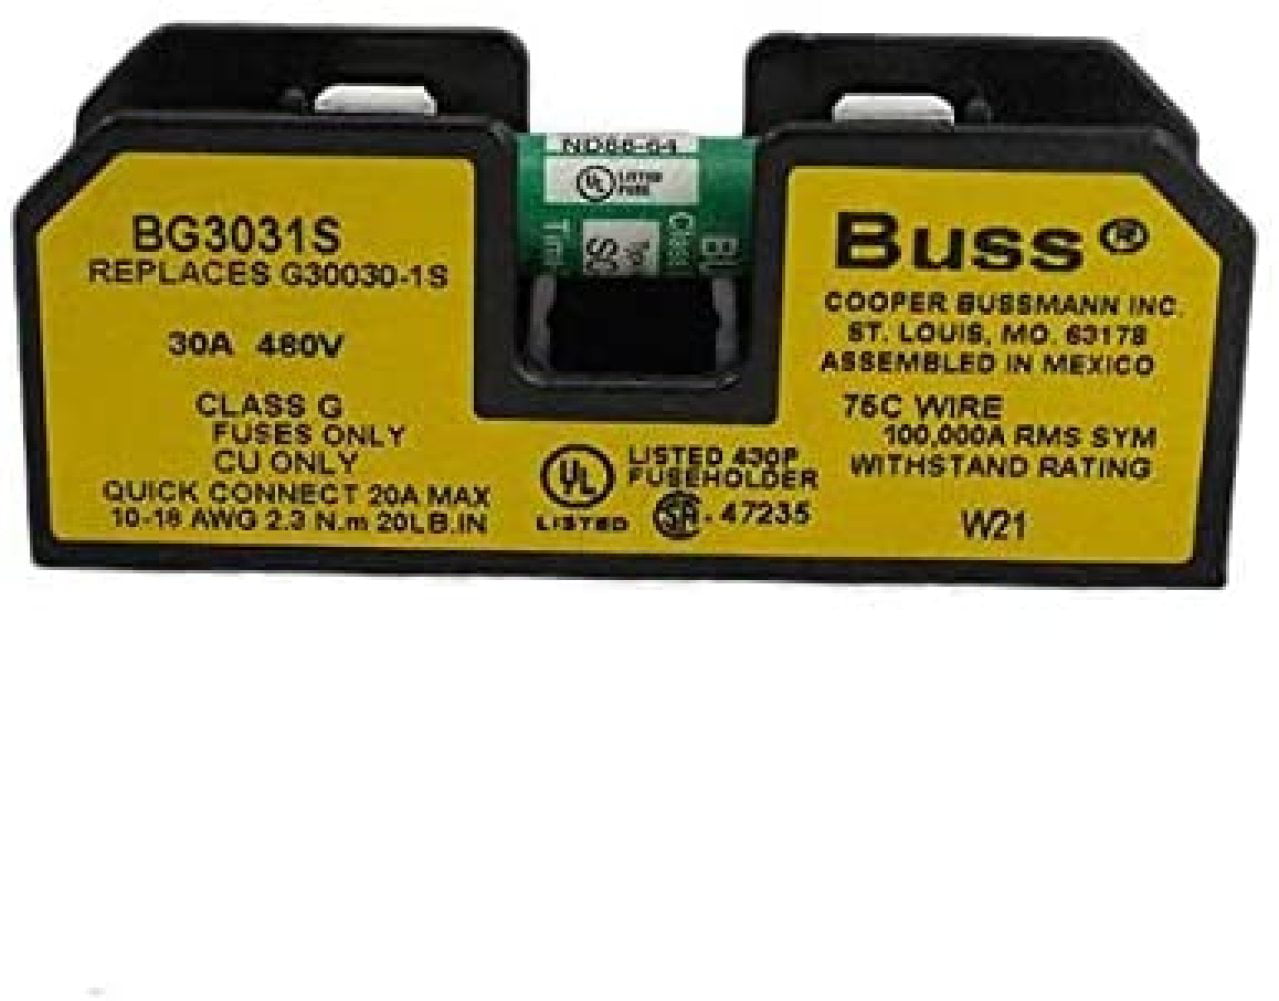 1.5" x 3/8" Bussman FUSE HOLDER  for spa & hot tub Time-Delay ClassG fuses size 